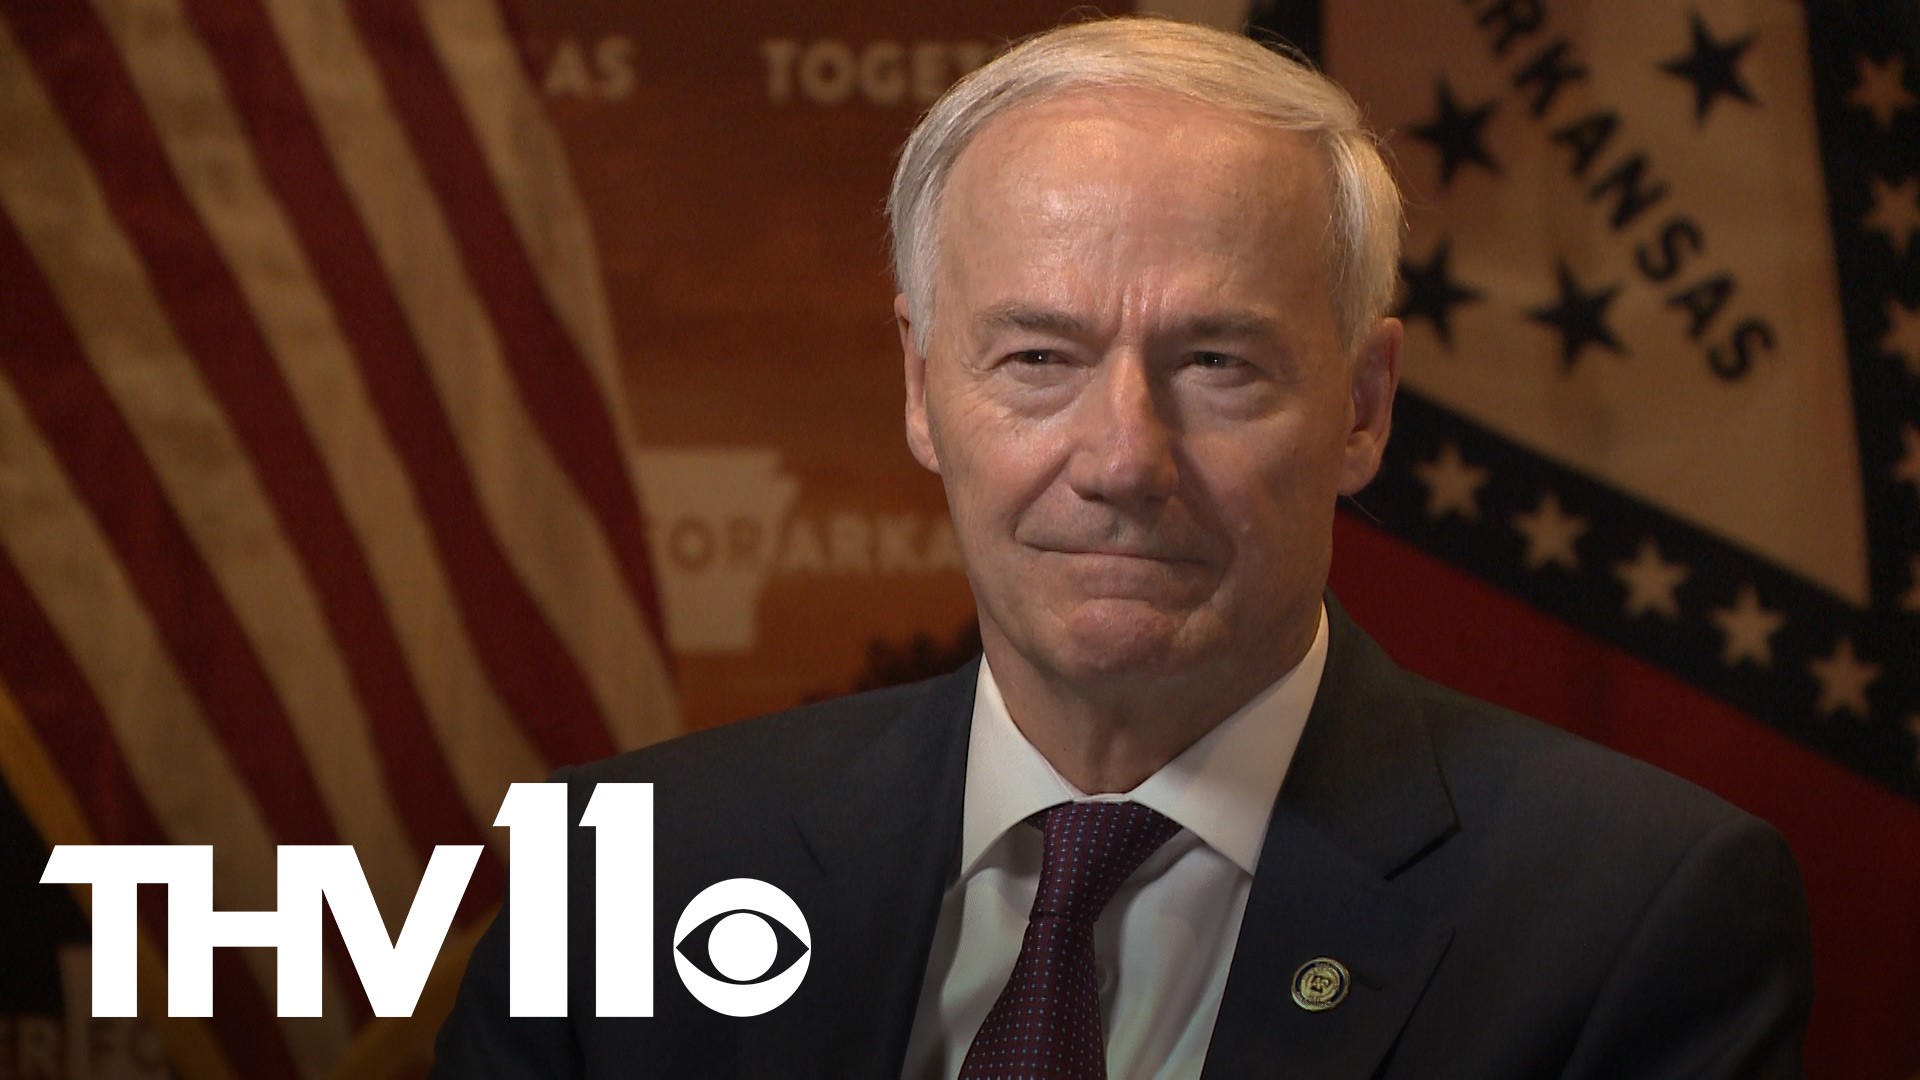 Gov. Asa Hutchinson said that although the legislature passed the bill exempting state employees from getting the COVID-19 vaccine, he will not sign it.